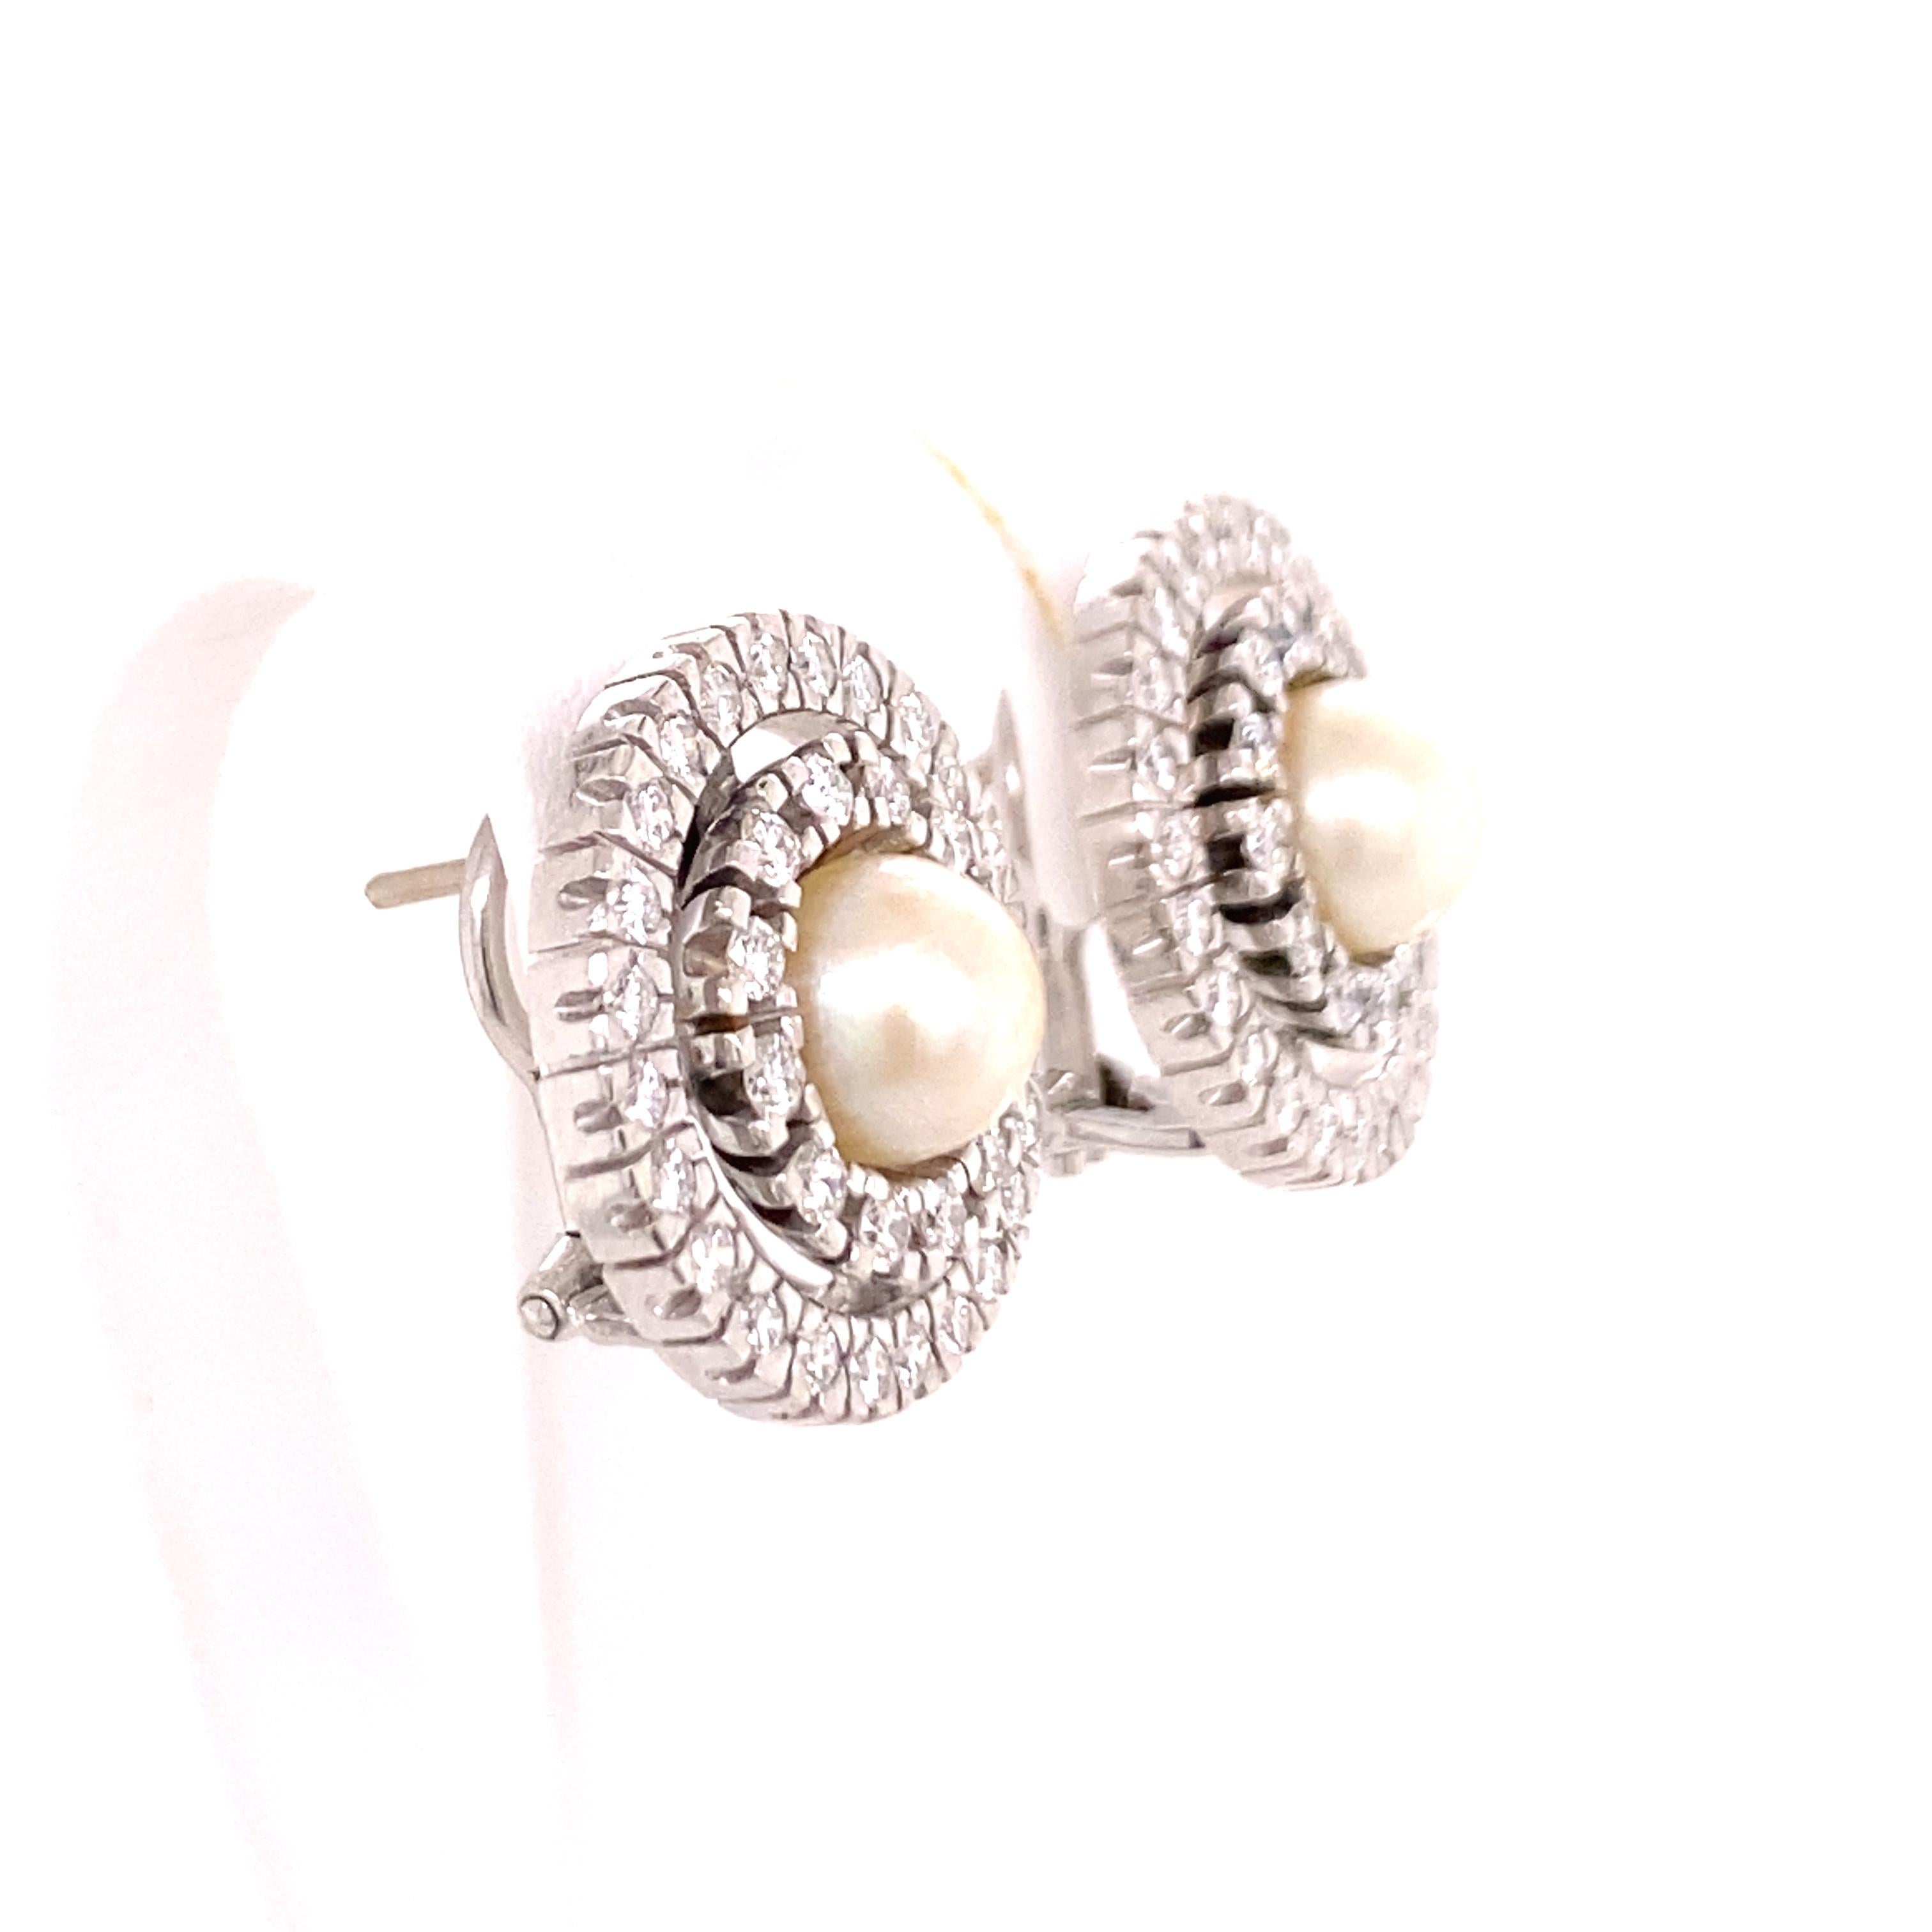 Brilliant Cut Akoya Cultured Pearl and Diamond Earclips in 18 Karat White Gold